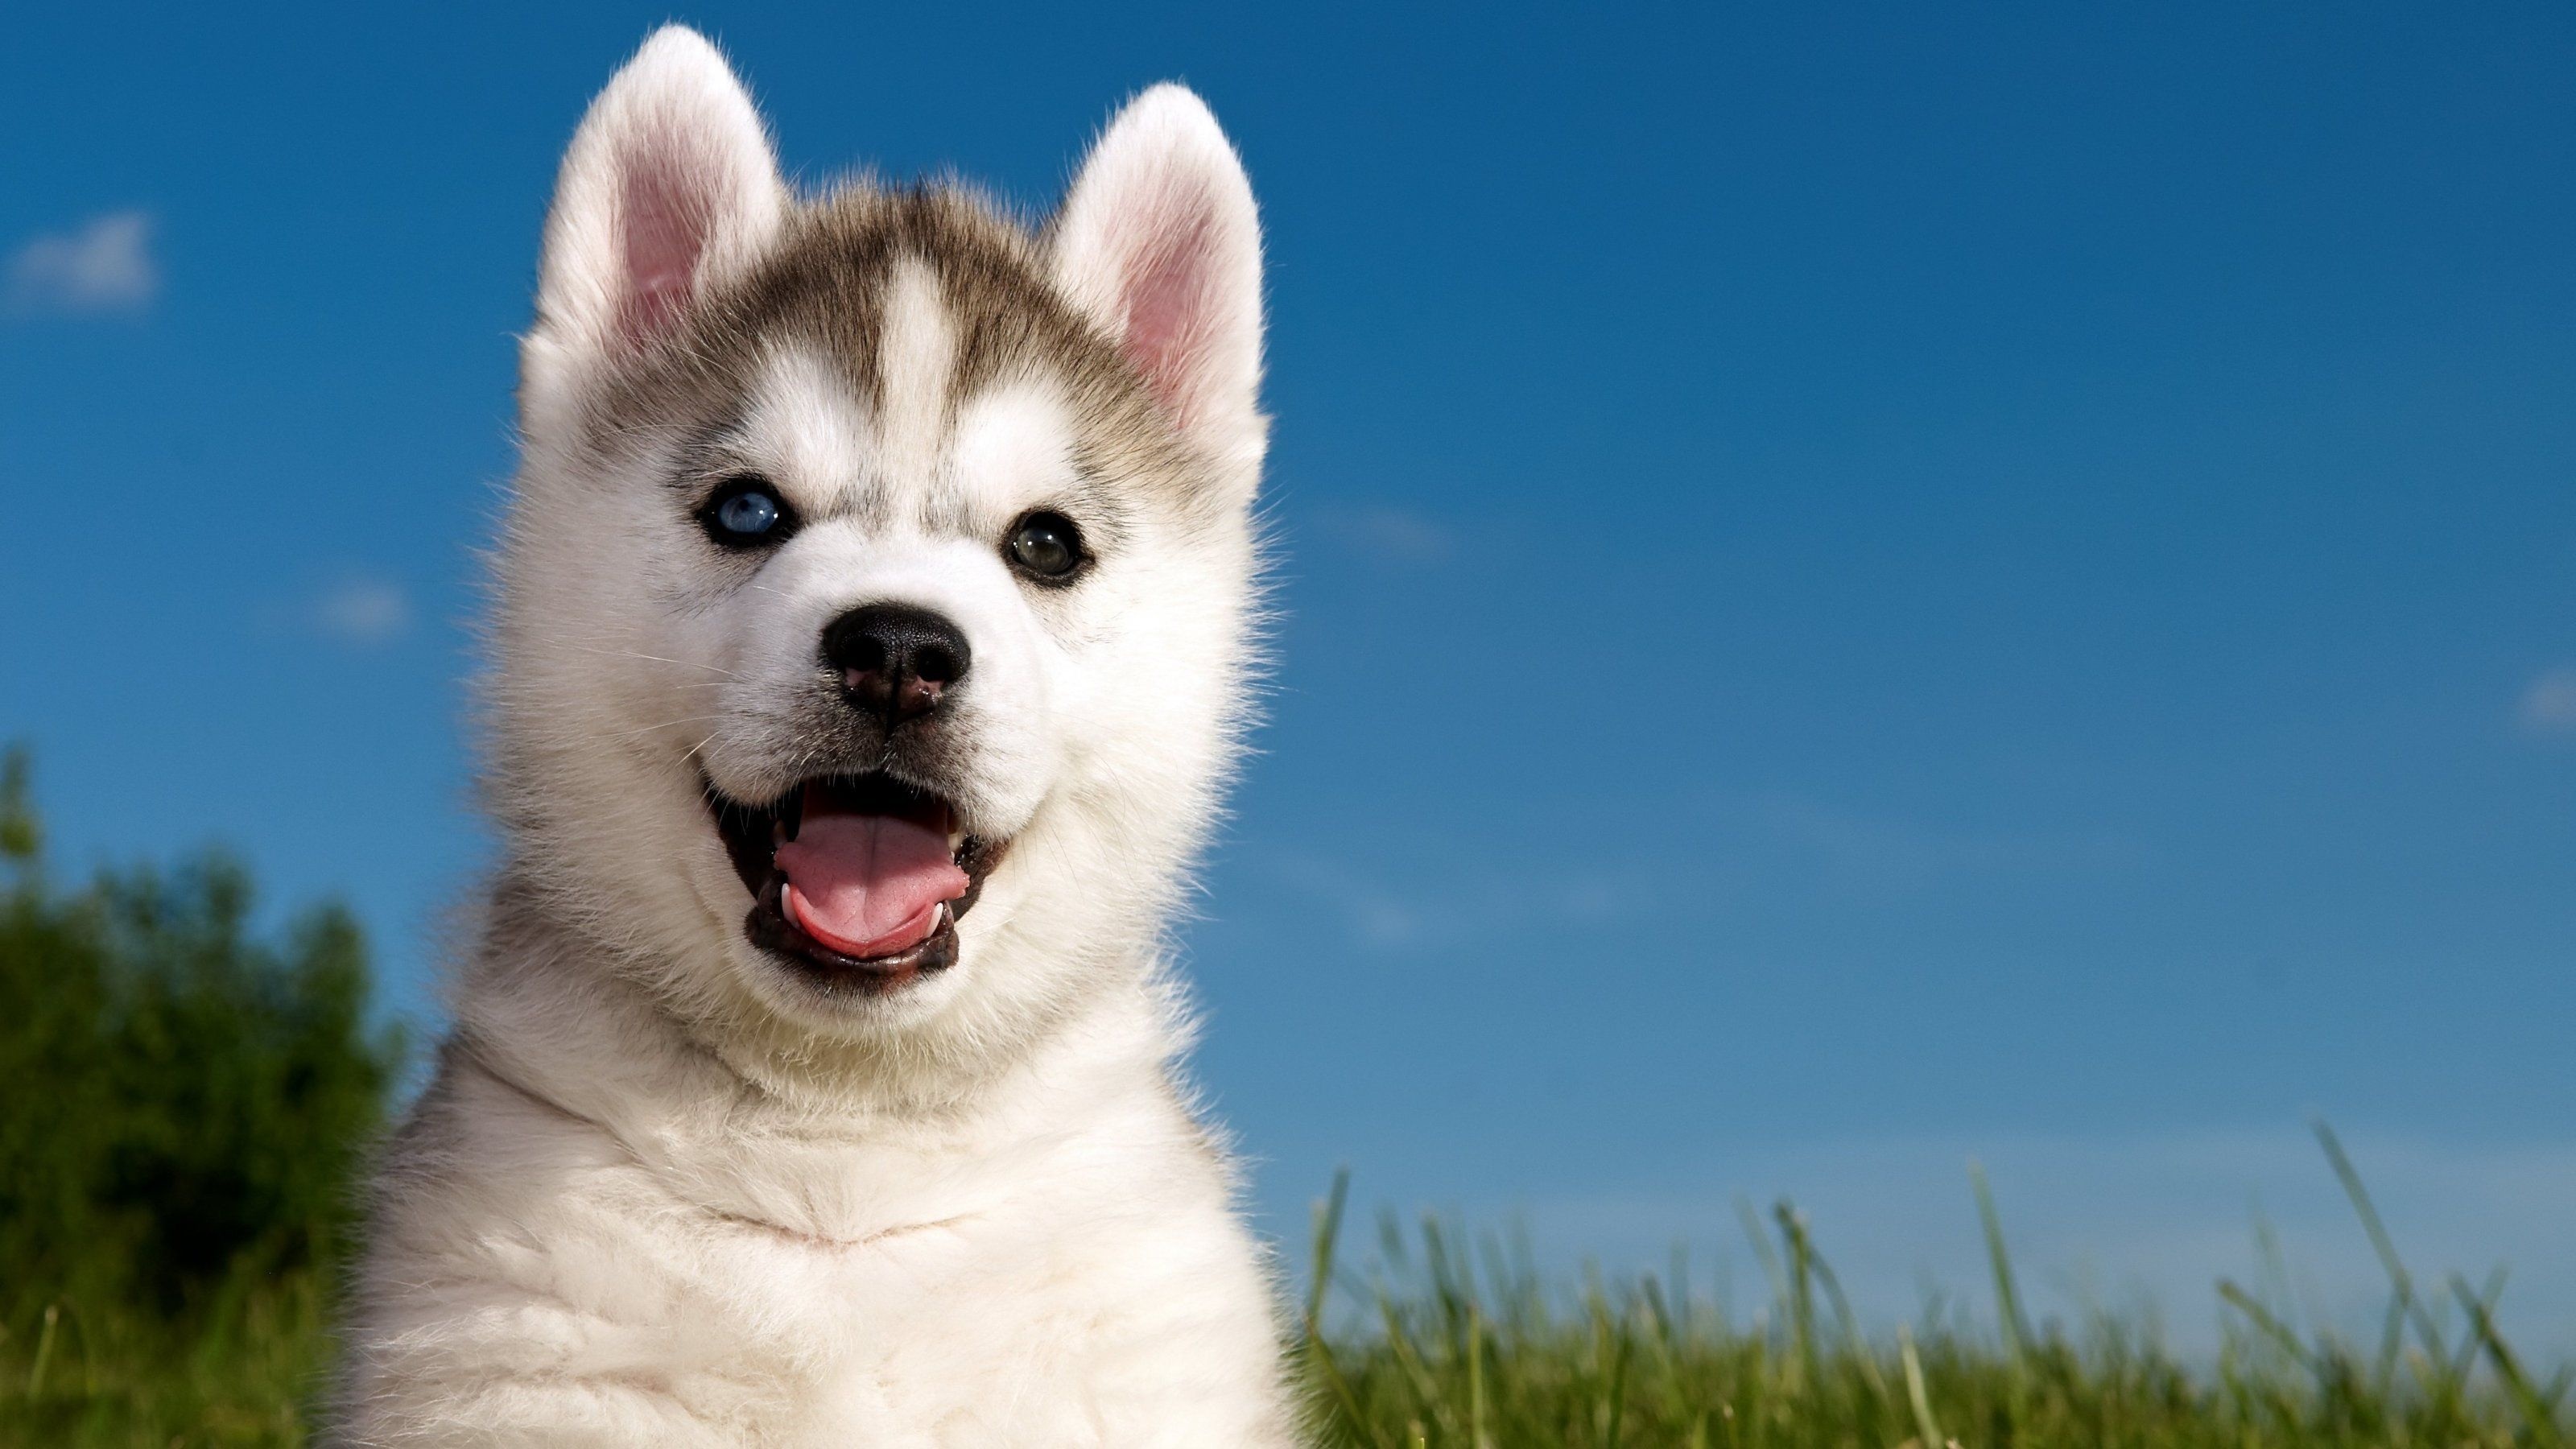 Cute huskies, Adorable and fluffy, Playful companions, Endless happiness, 3200x1800 HD Desktop